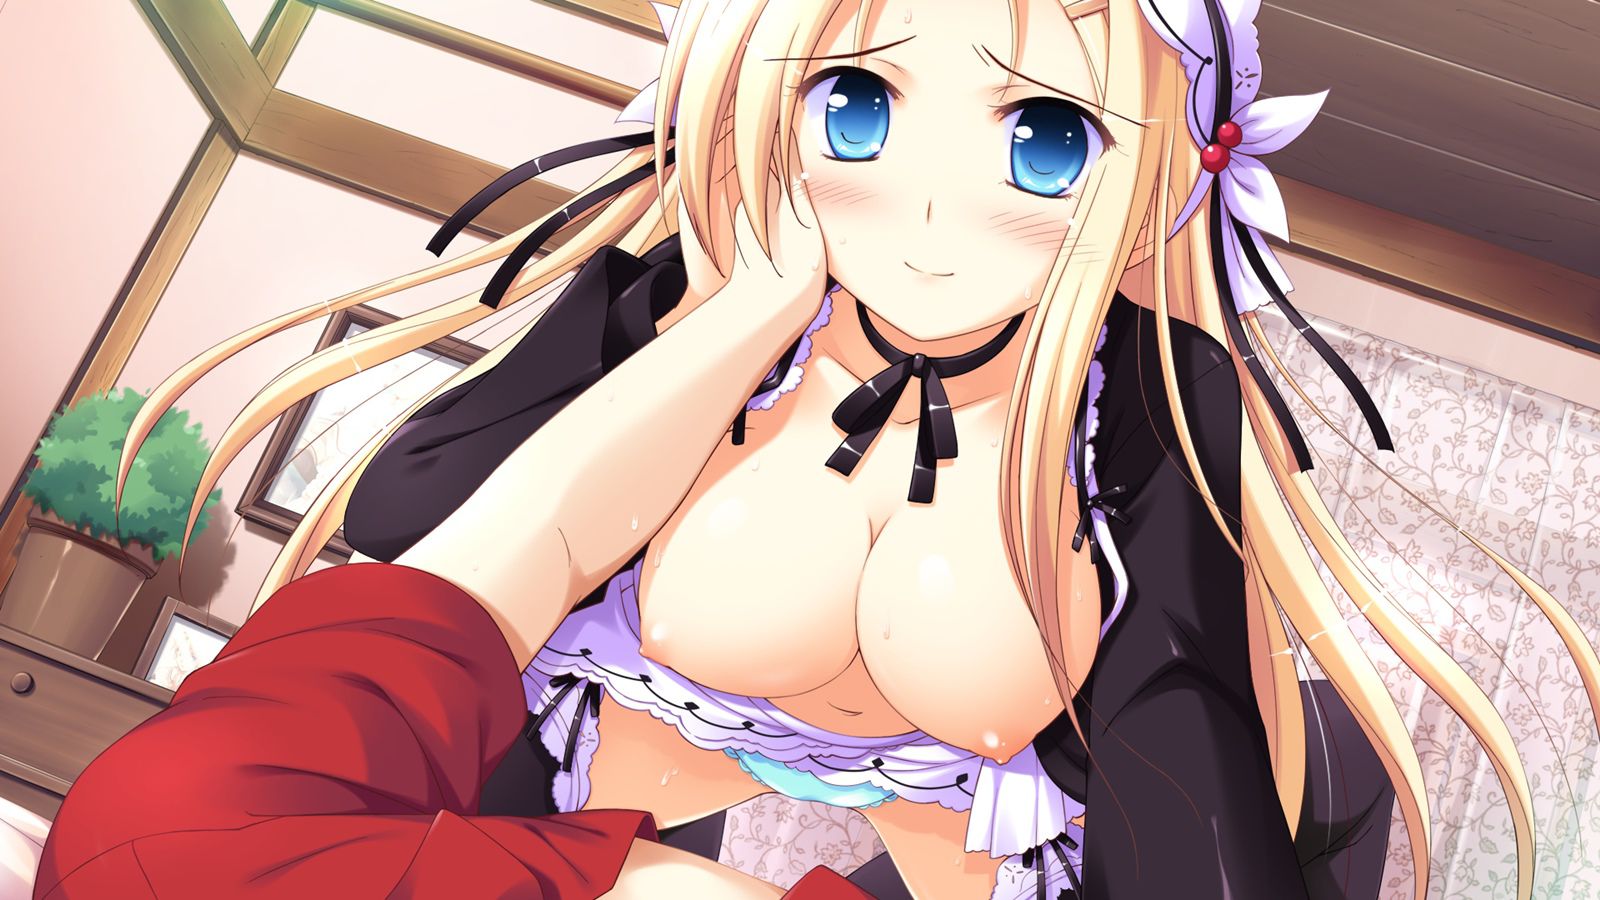 Campanella's blessing [18 eroge CG] wallpapers-images part 2 4